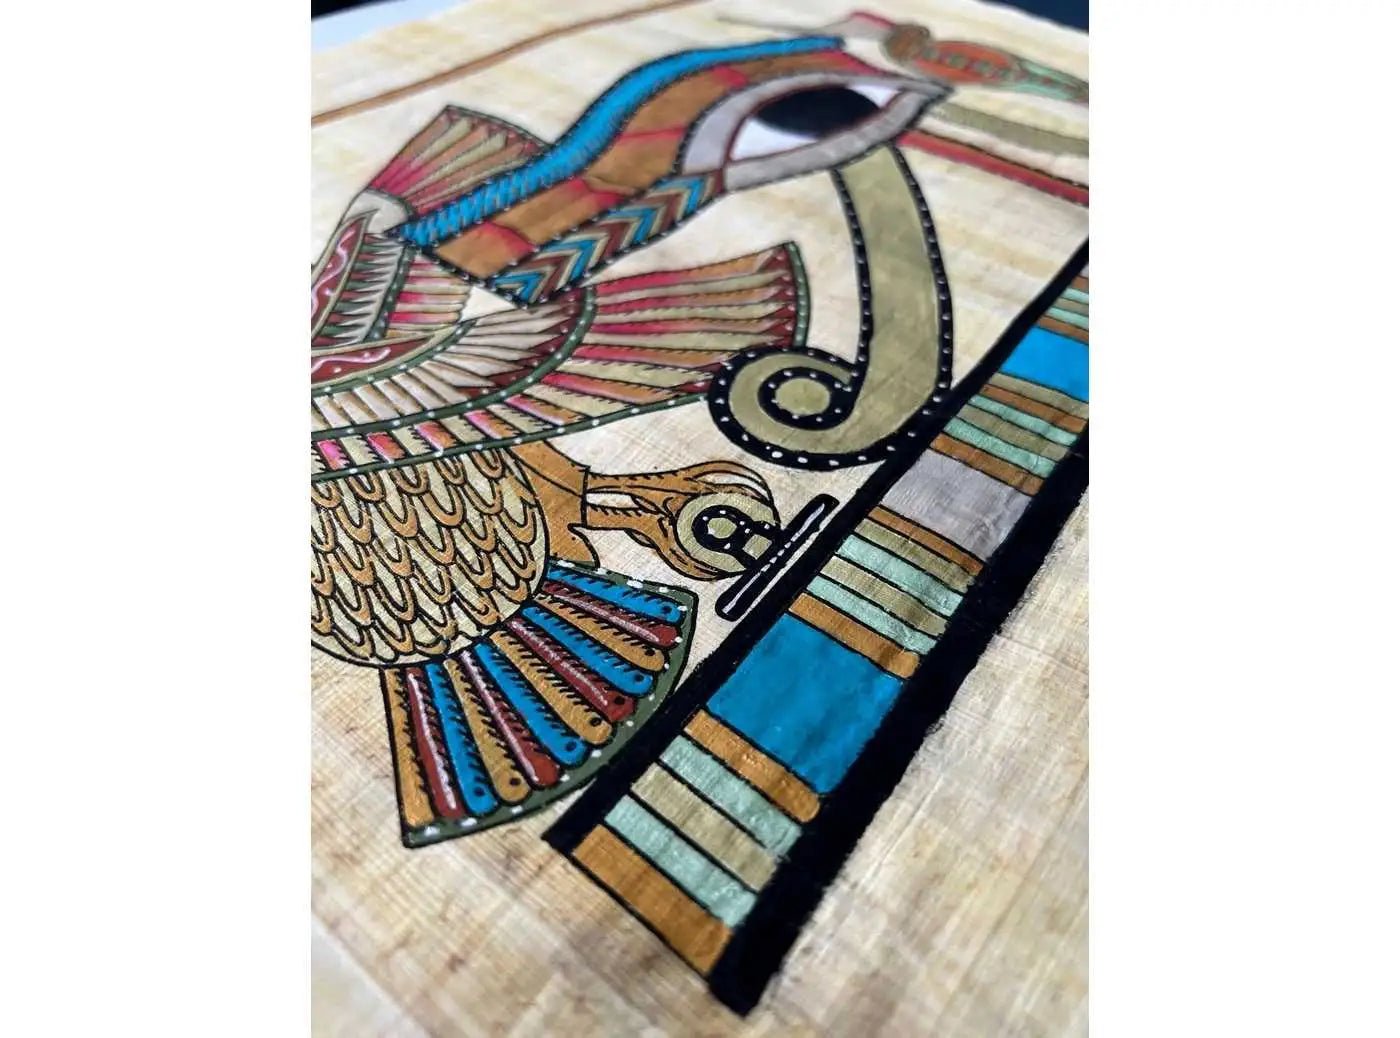 Eye Of Horus - Papyrus Painting - Authentic Papyrus Art of Ancient Egypt - Egypt Decor - V2